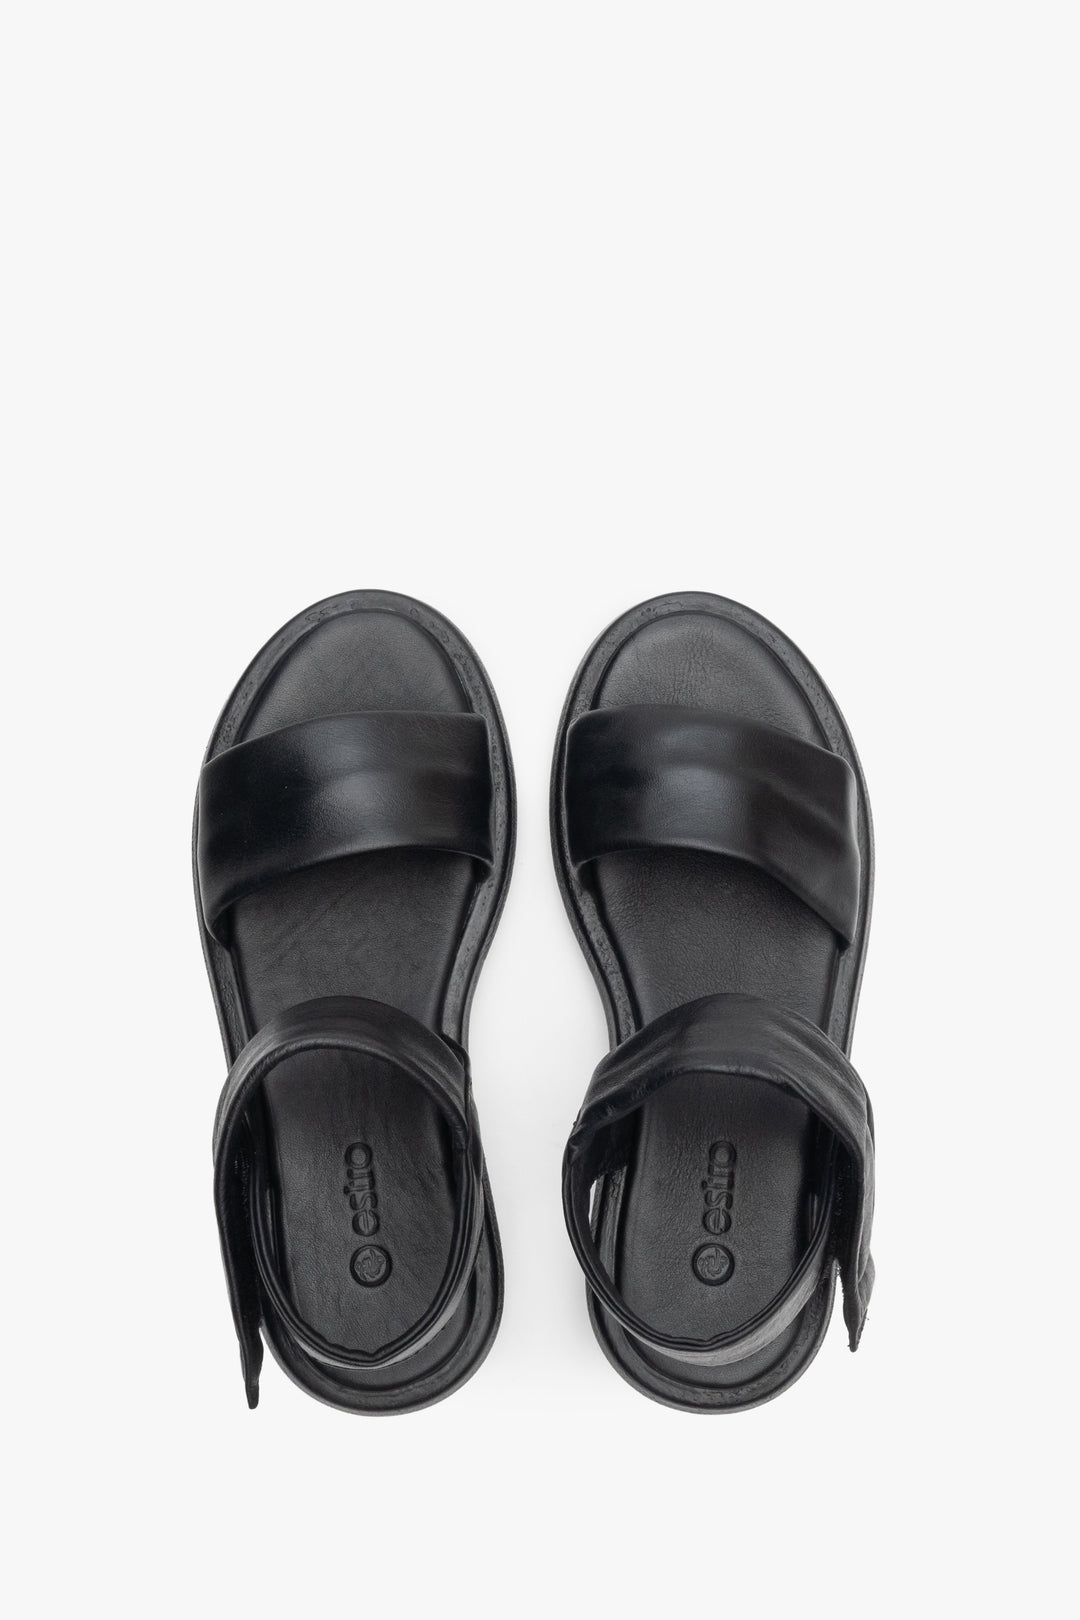 Women's black leather sandals with a low heel - presentation of footwear from above.